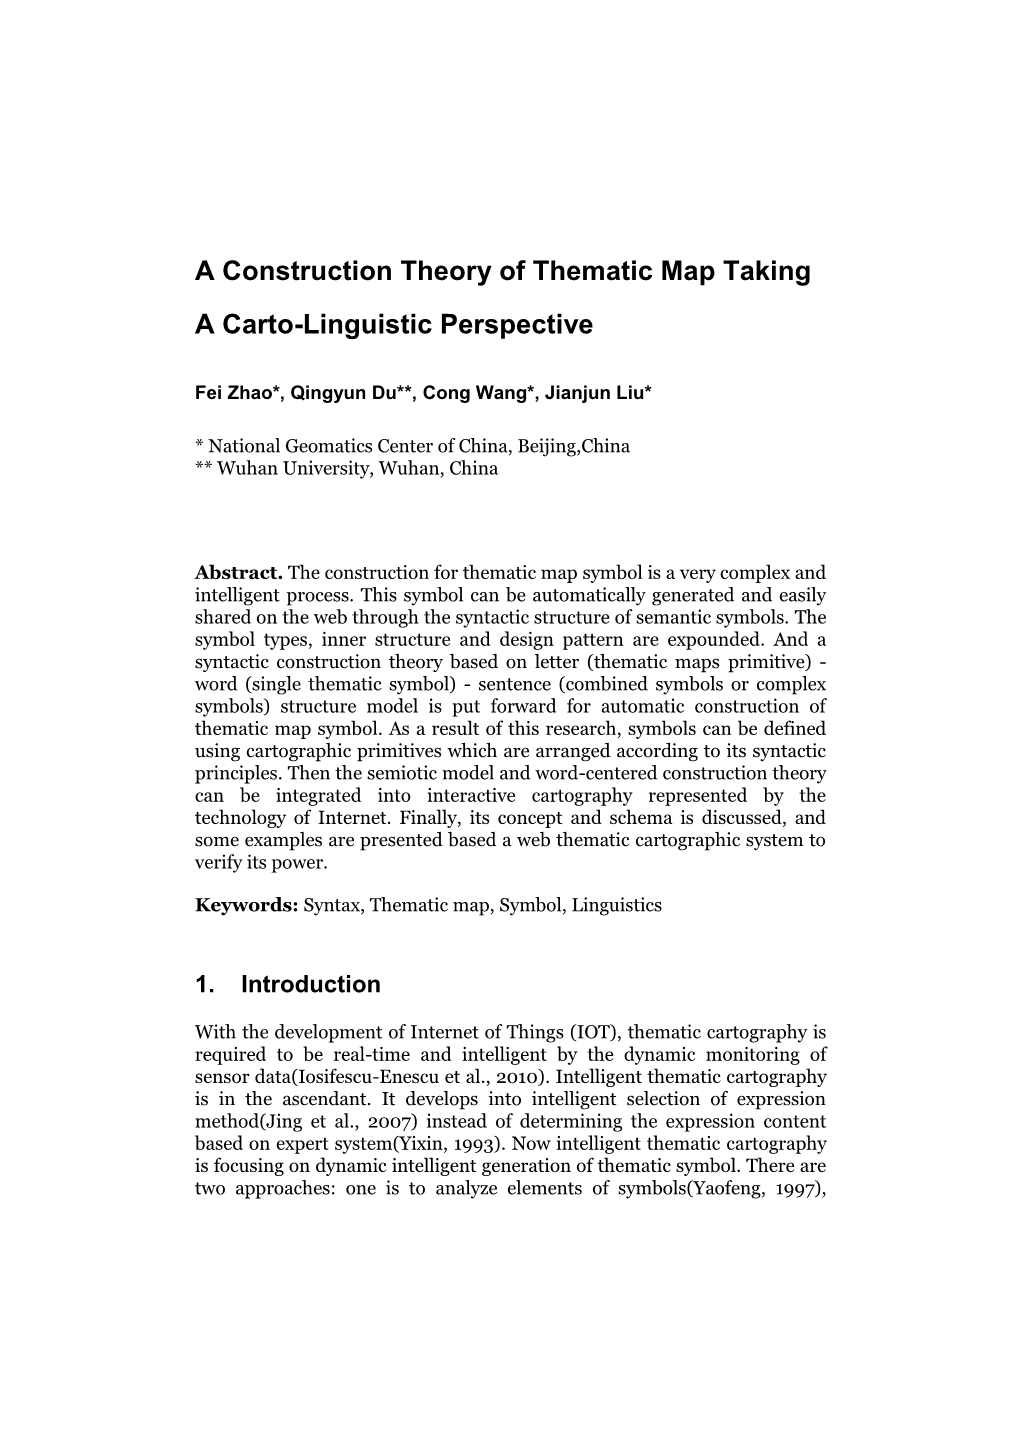 A Construction Theory of Thematic Map Taking a Carto-Linguistic Perspective